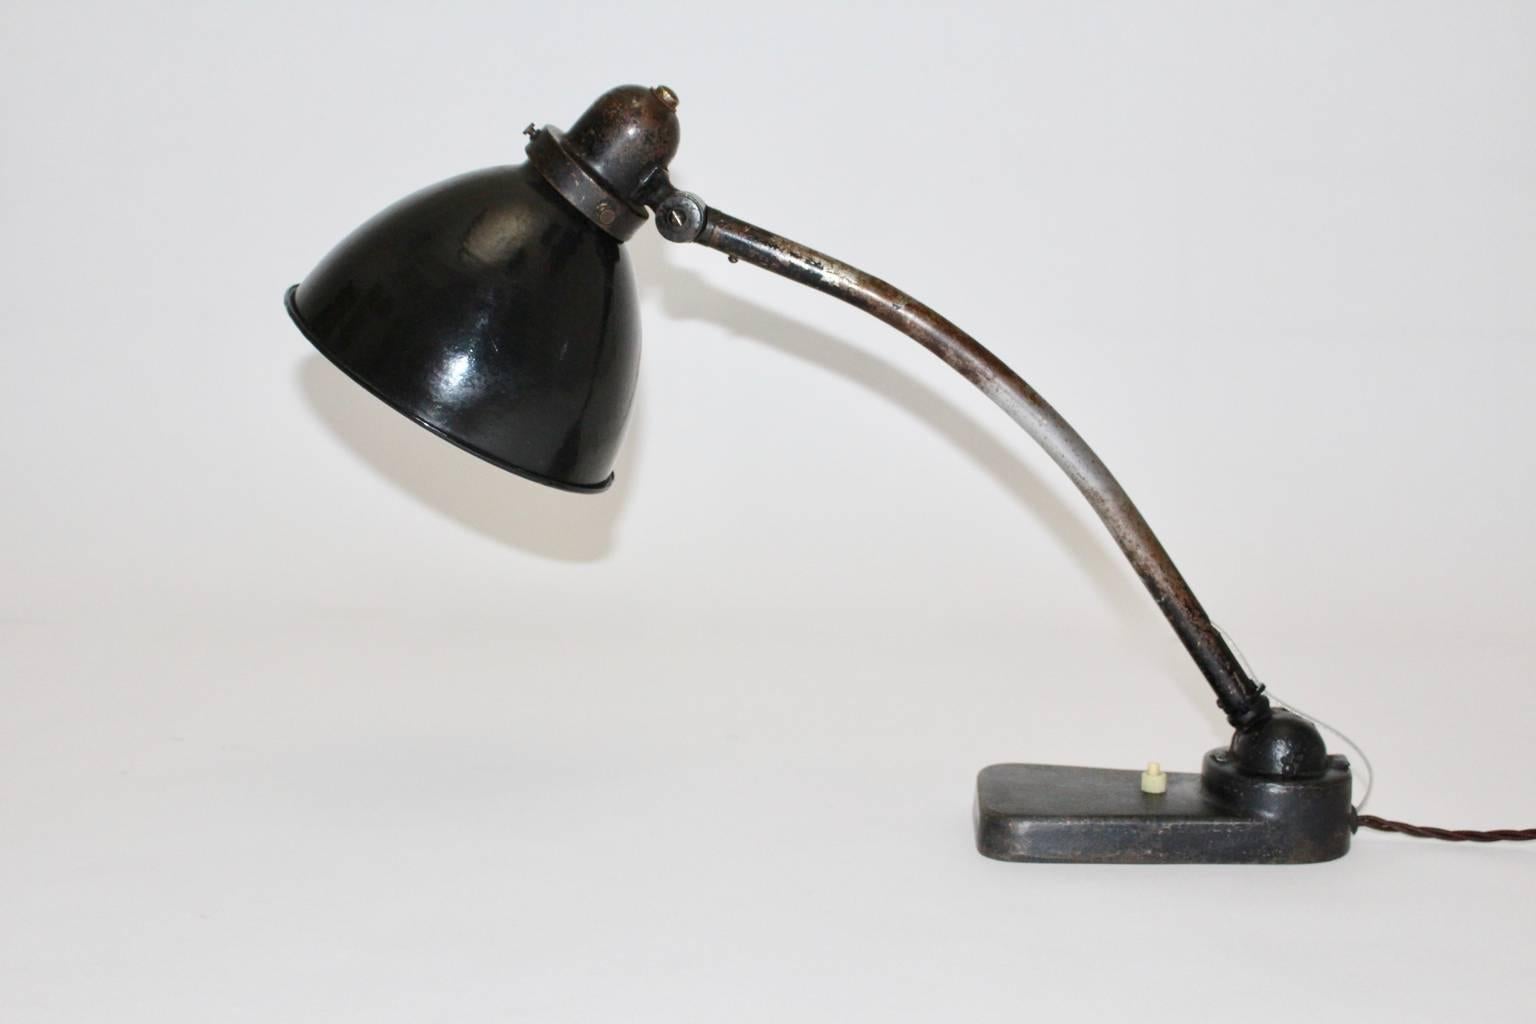 Black Bauhaus Vintage Metal Table Lamp by Christian Dell, 1930s, Germany For Sale 1